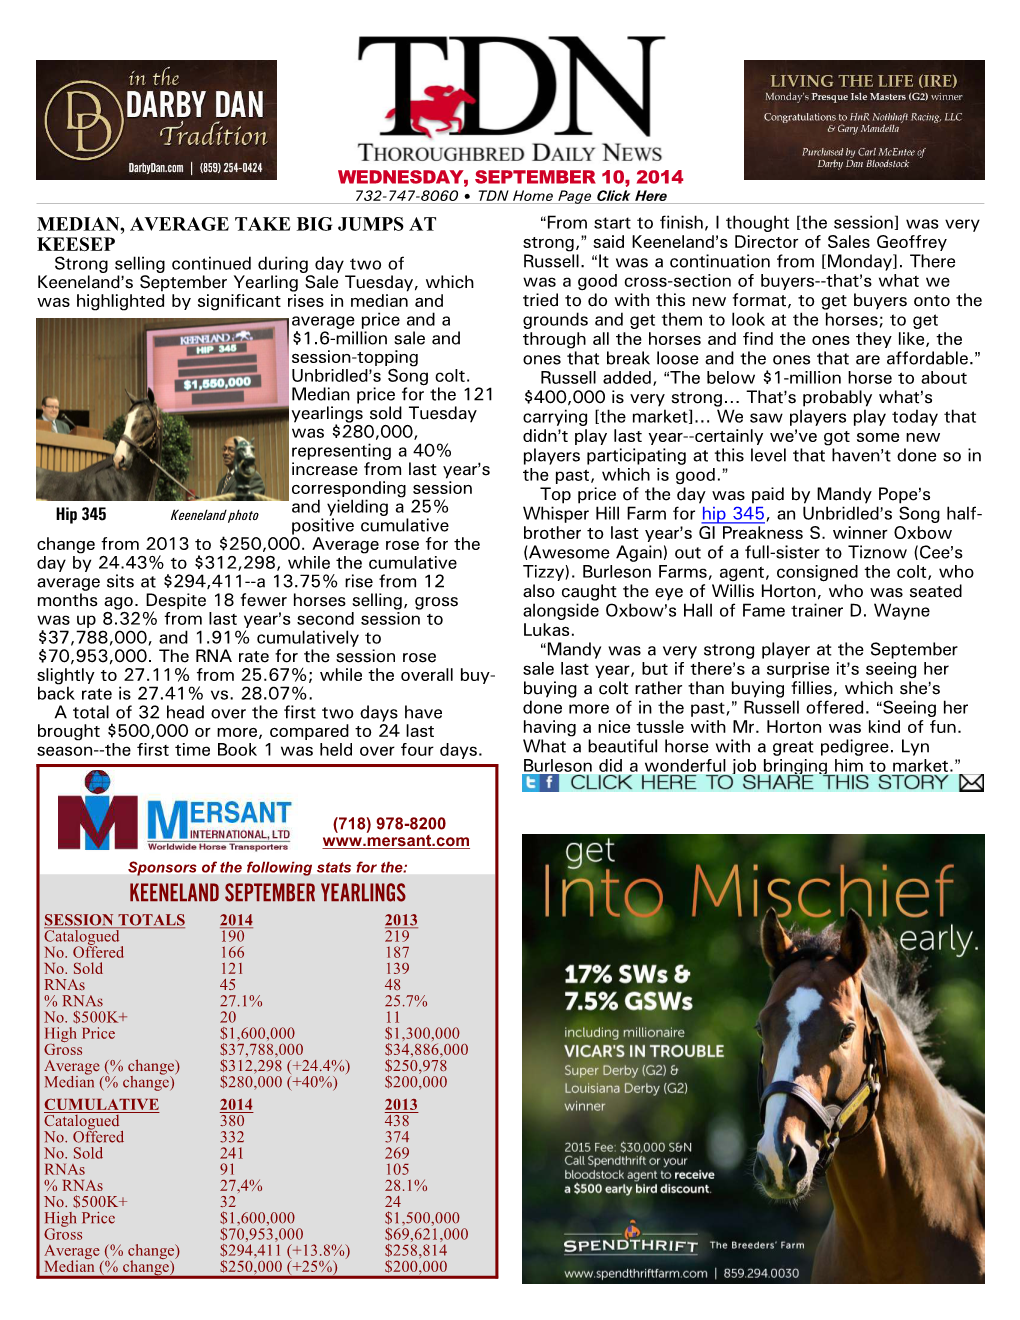 KEENELAND SEPTEMBER YEARLINGS SESSION TOTALS 2014 2013 Catalogued 190 219 No